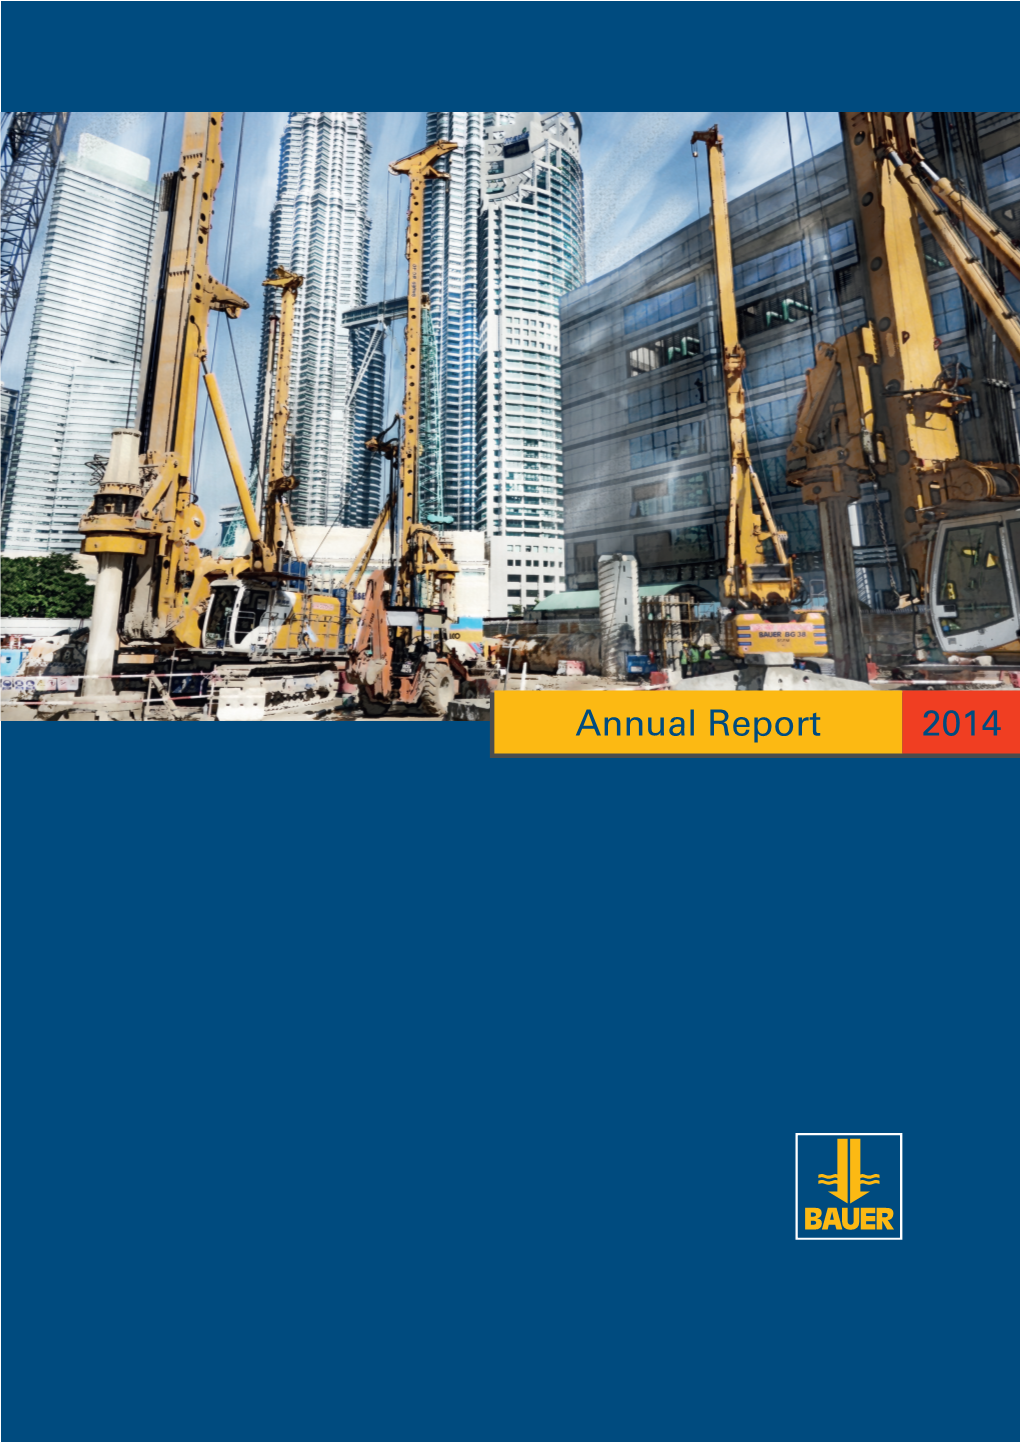 Annual Report 2014 the BAUER Group Is an International Construction and Machinery Manufacturing Concern Based in Schrobenhausen, Bavaria